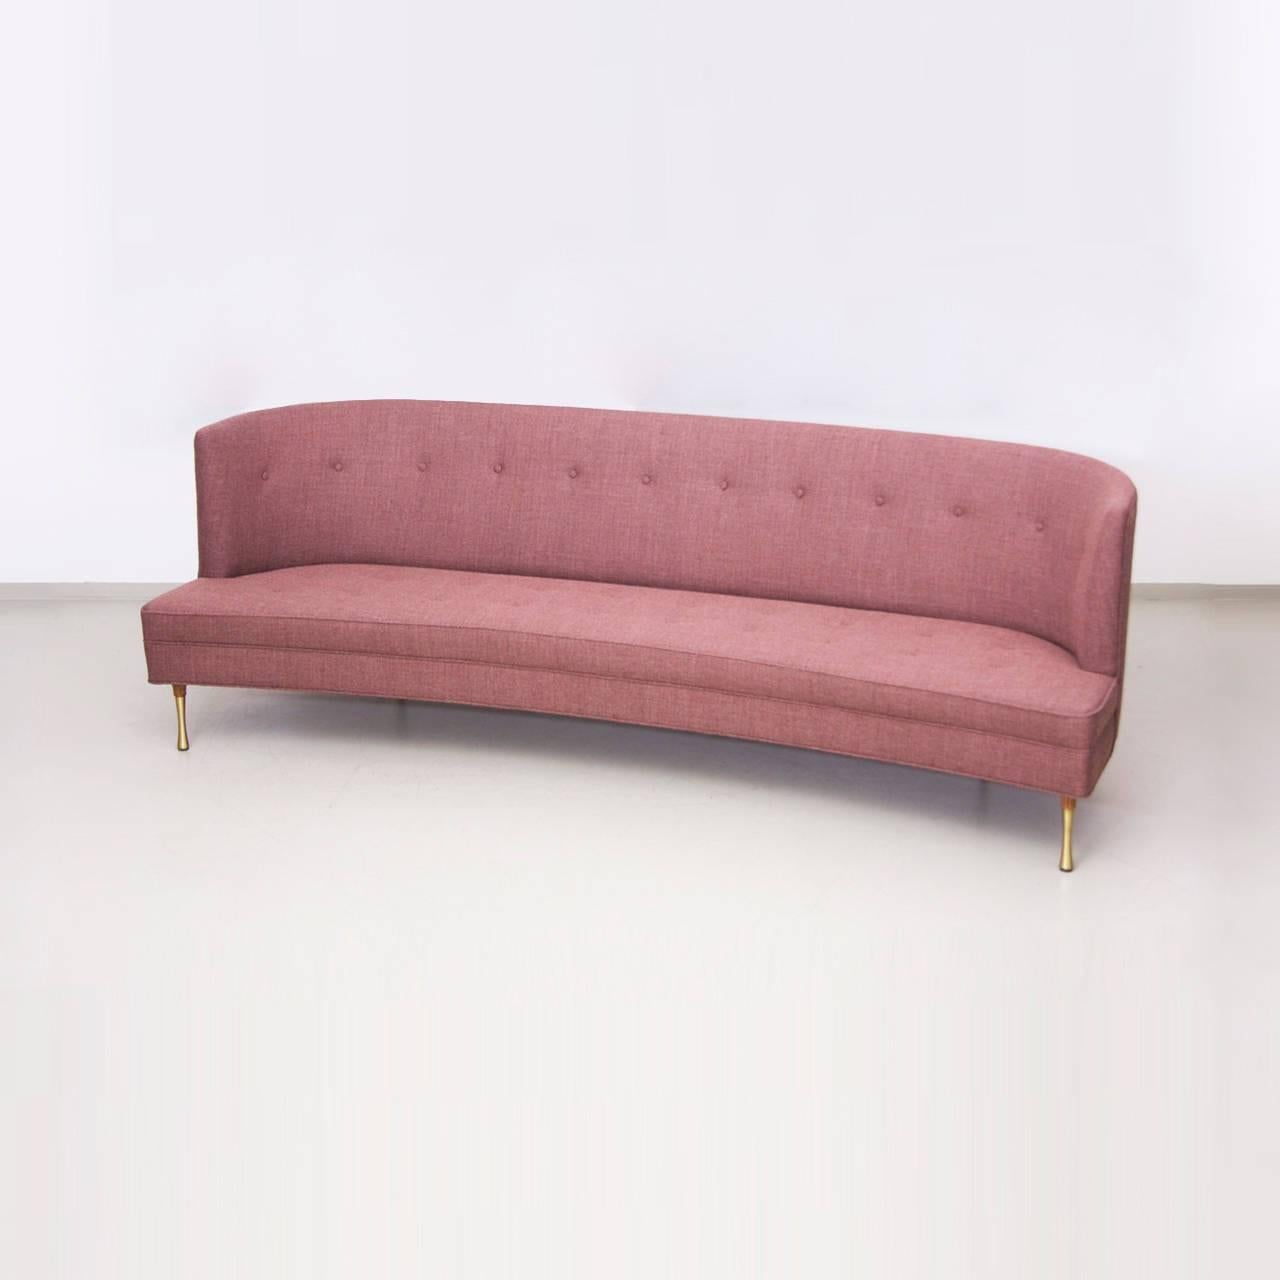 Rare curved sofa by Kipp Stewart for Directional in Kvadrat / Maharam fabric. Solid brass legs and a very feminine design.